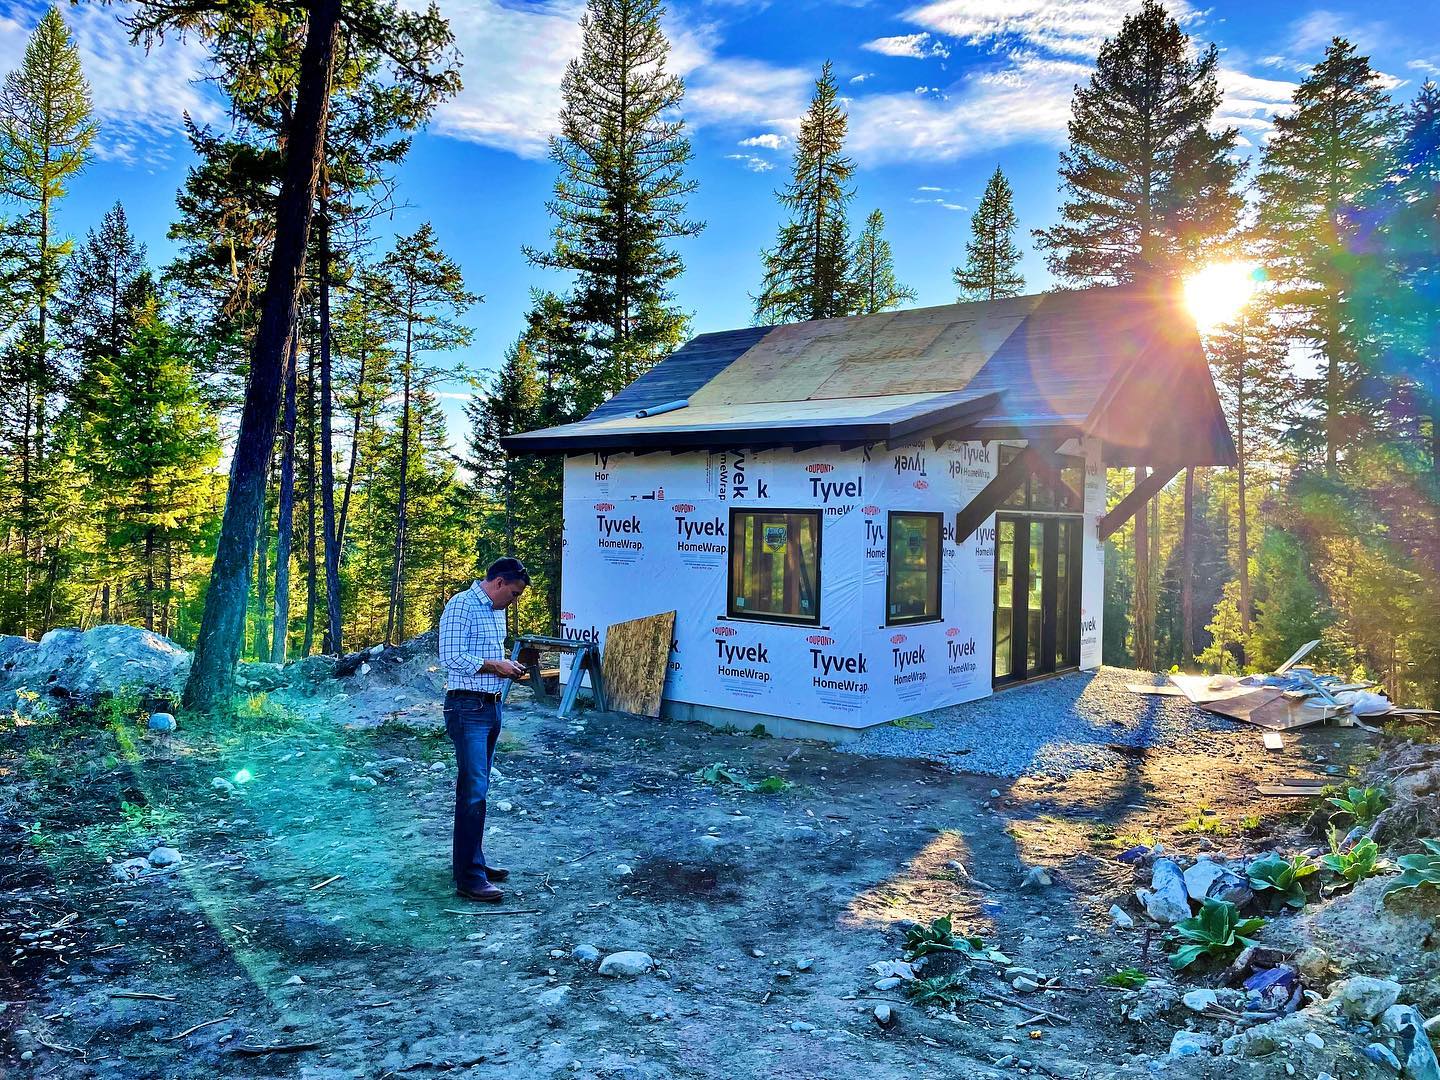 Newest tiny house addition to the neighborhood! How about this for your home office? whitefish custom home builder